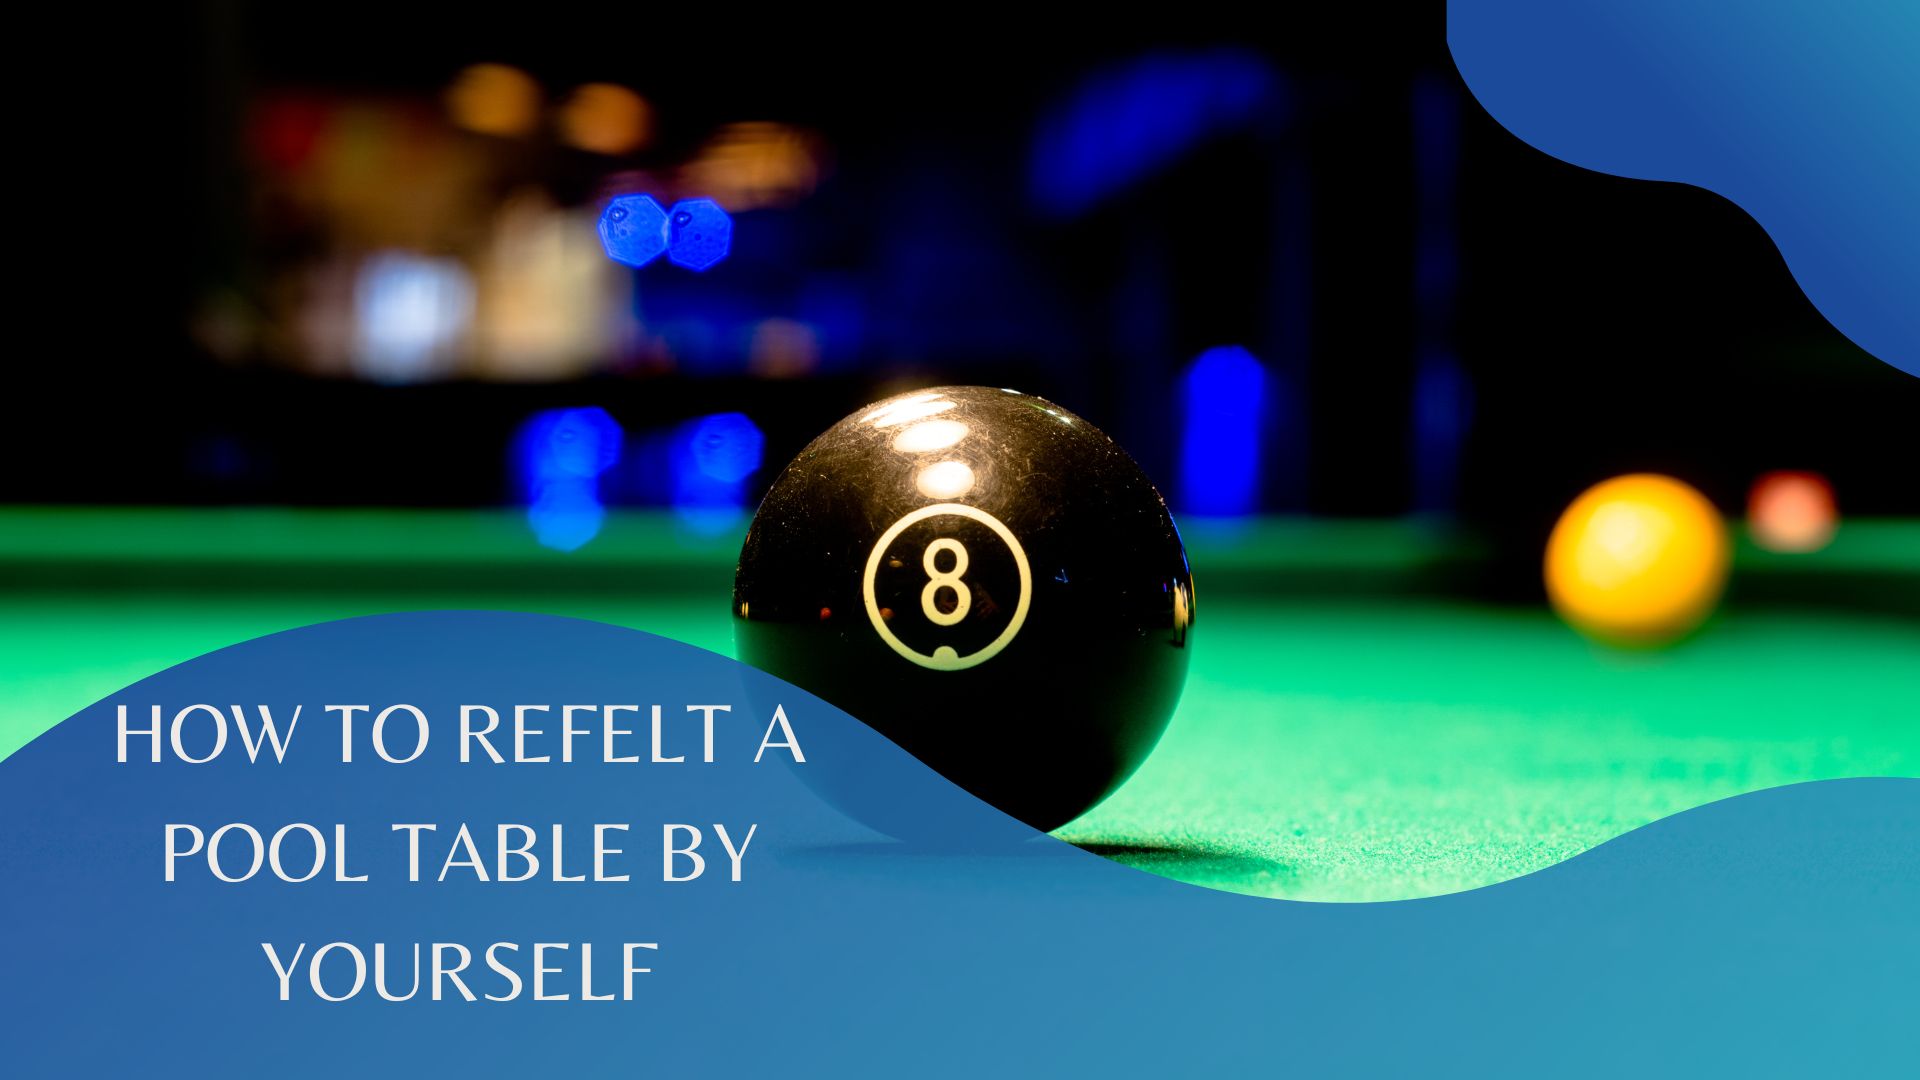 how to refelt a pool table yourself